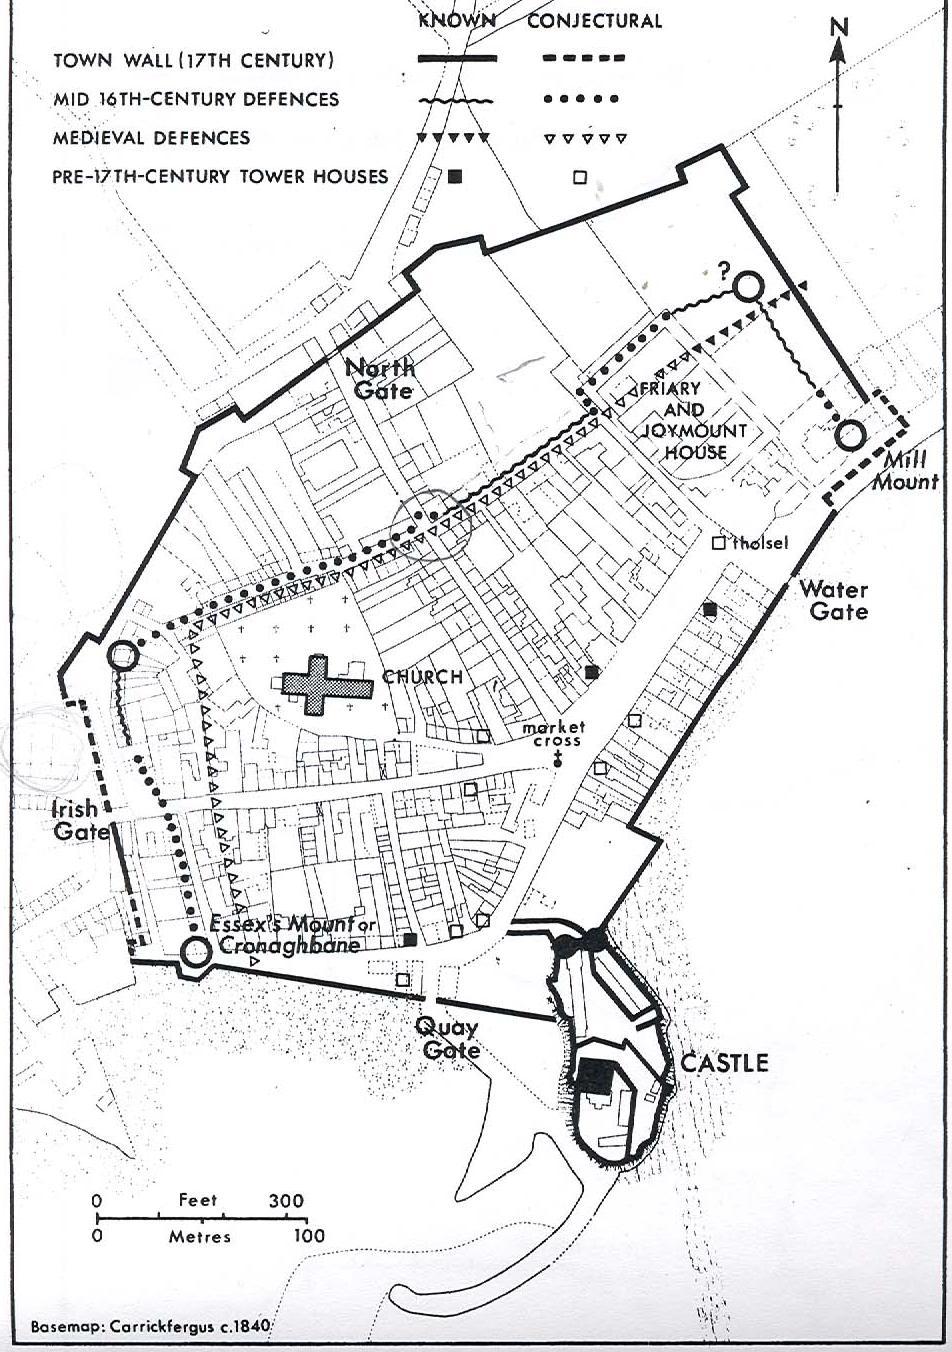 Figure 6. Lesley Simpson s map of Carrickfergus with the conjectural line of the Medieval and Tudor-period defences marked on it (Robinson 1986, 3, Figure 1). 2.